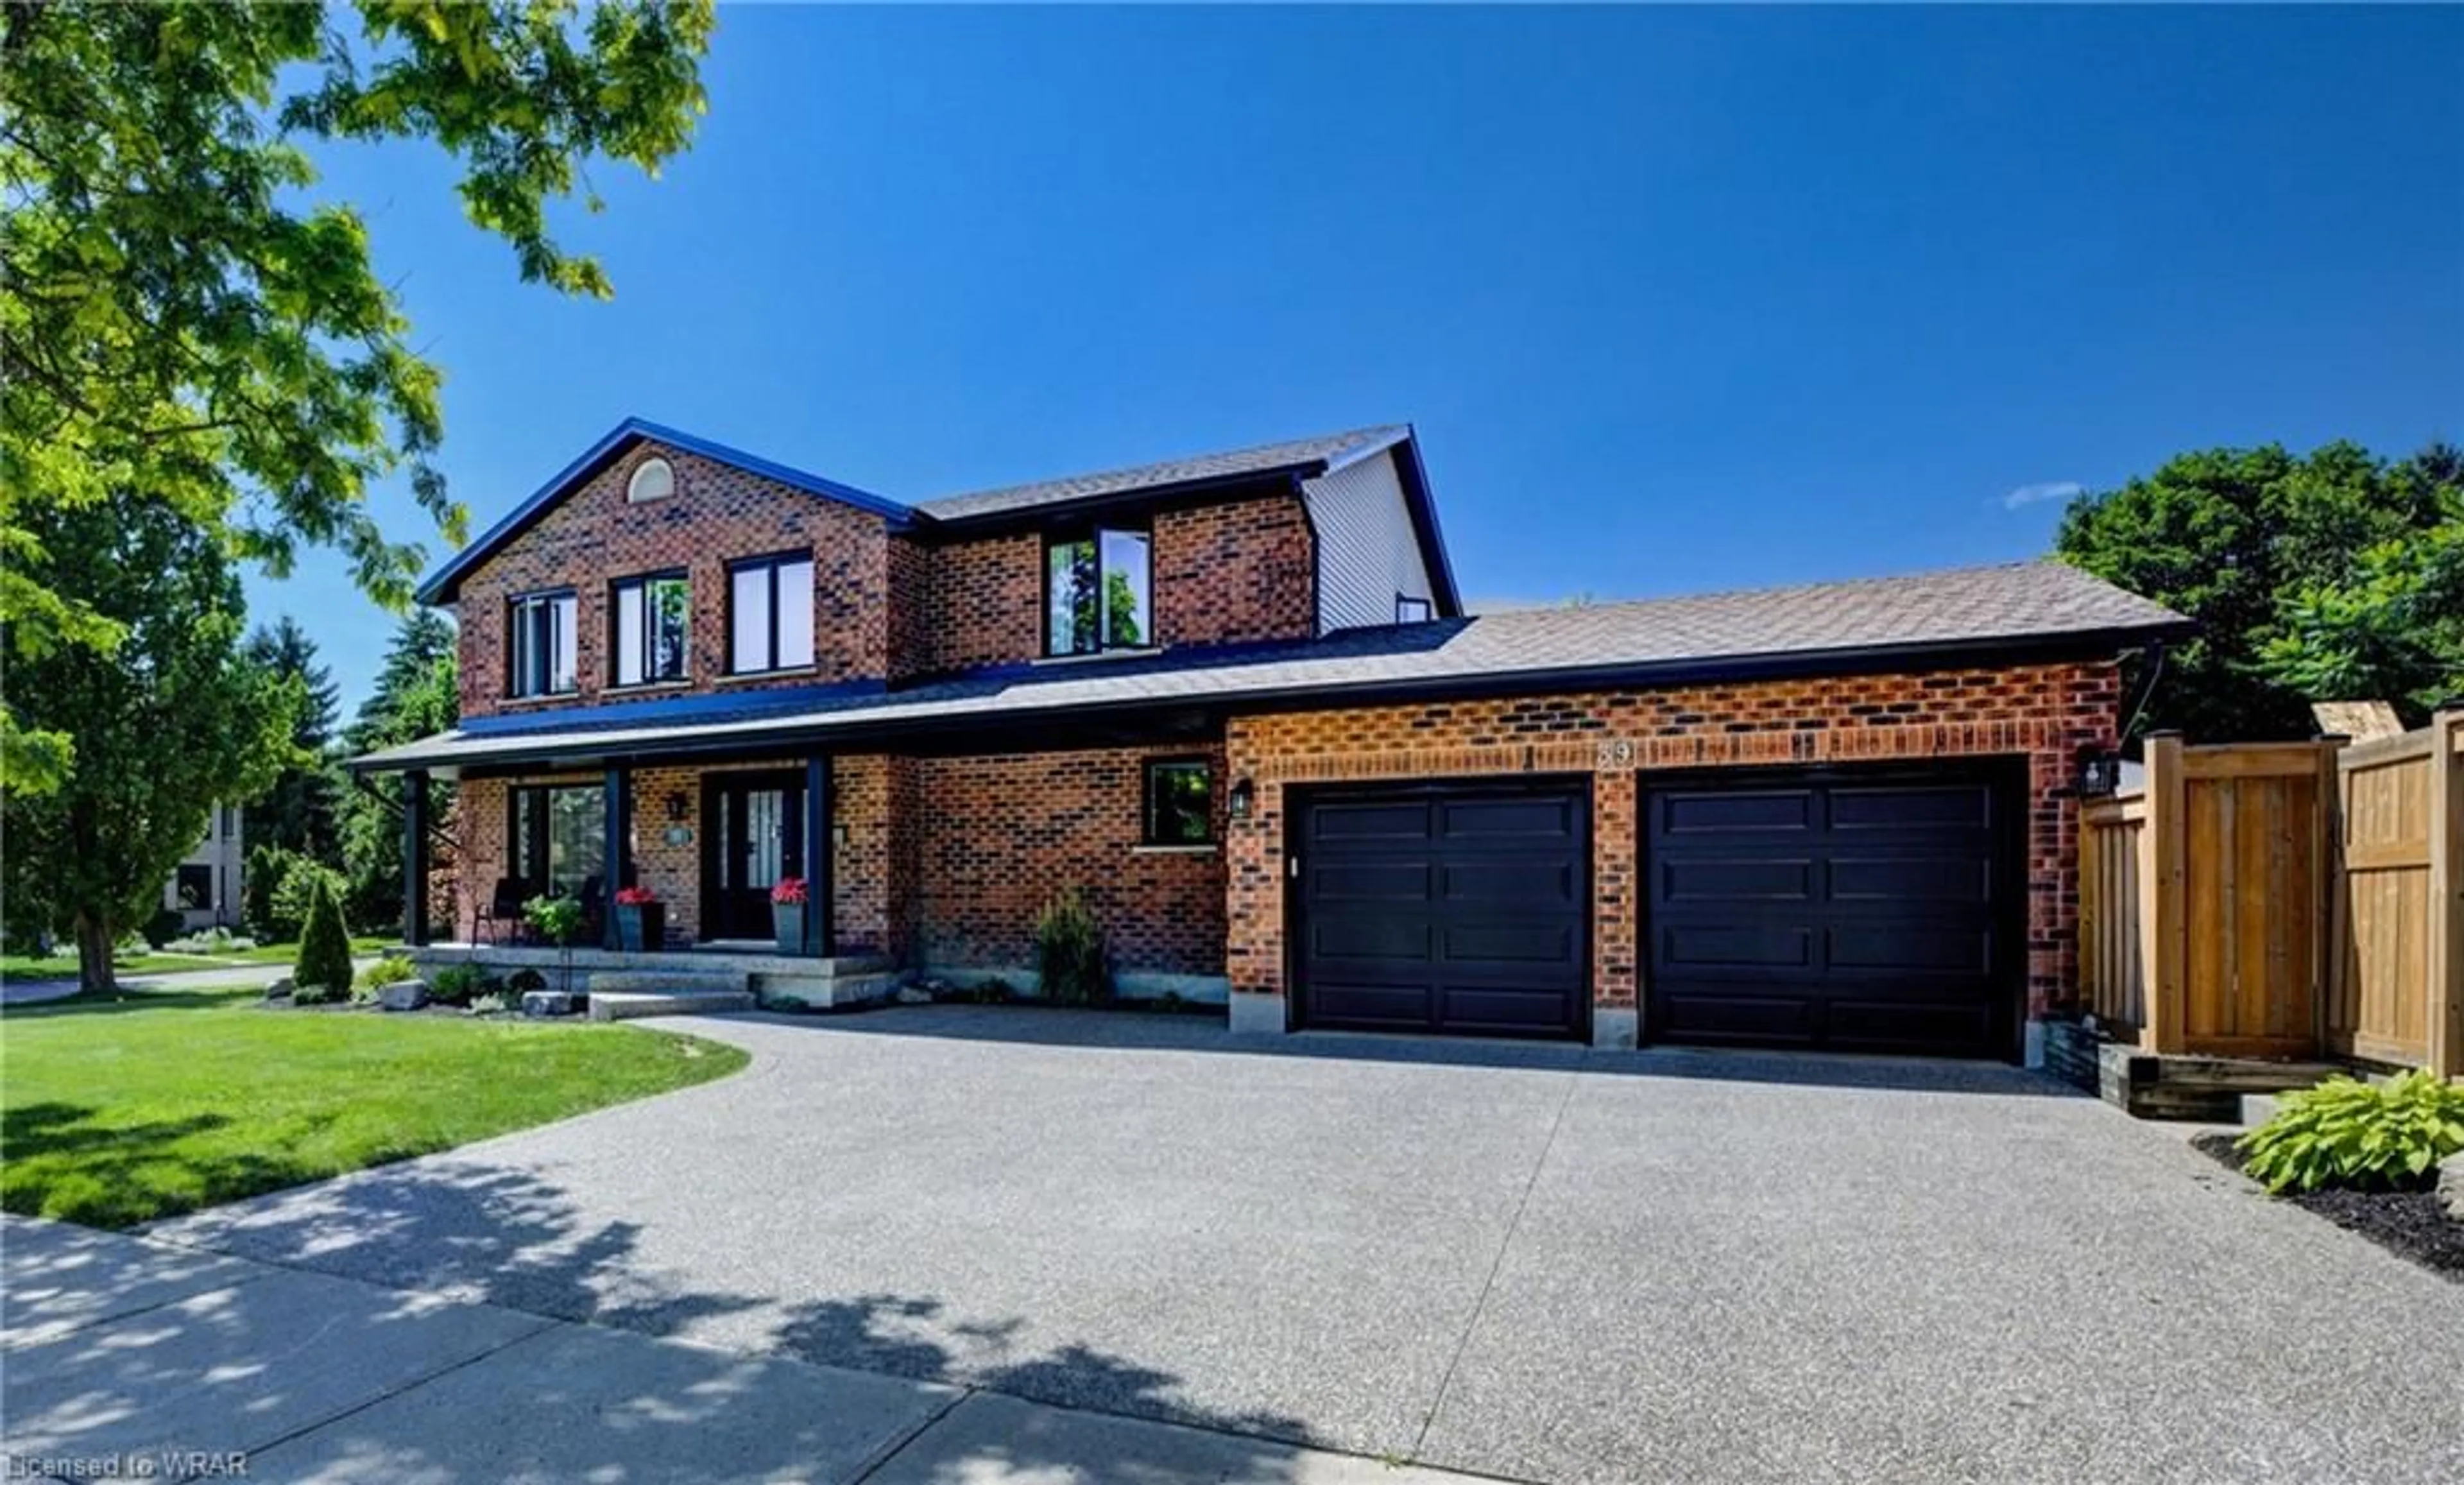 Home with brick exterior material for 39 Daimler Dr, Kitchener Ontario N2A 3W2